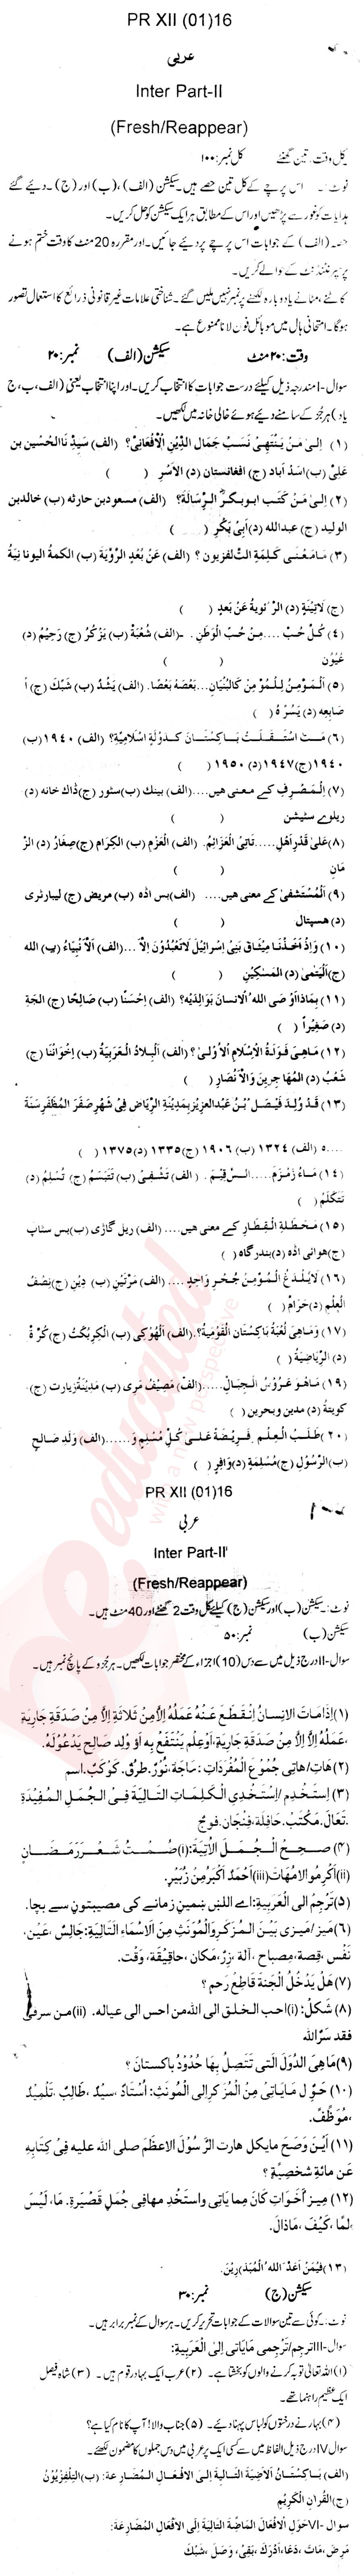 Arabic FA Part 2 Past Paper Group 1 BISE Abbottabad 2016